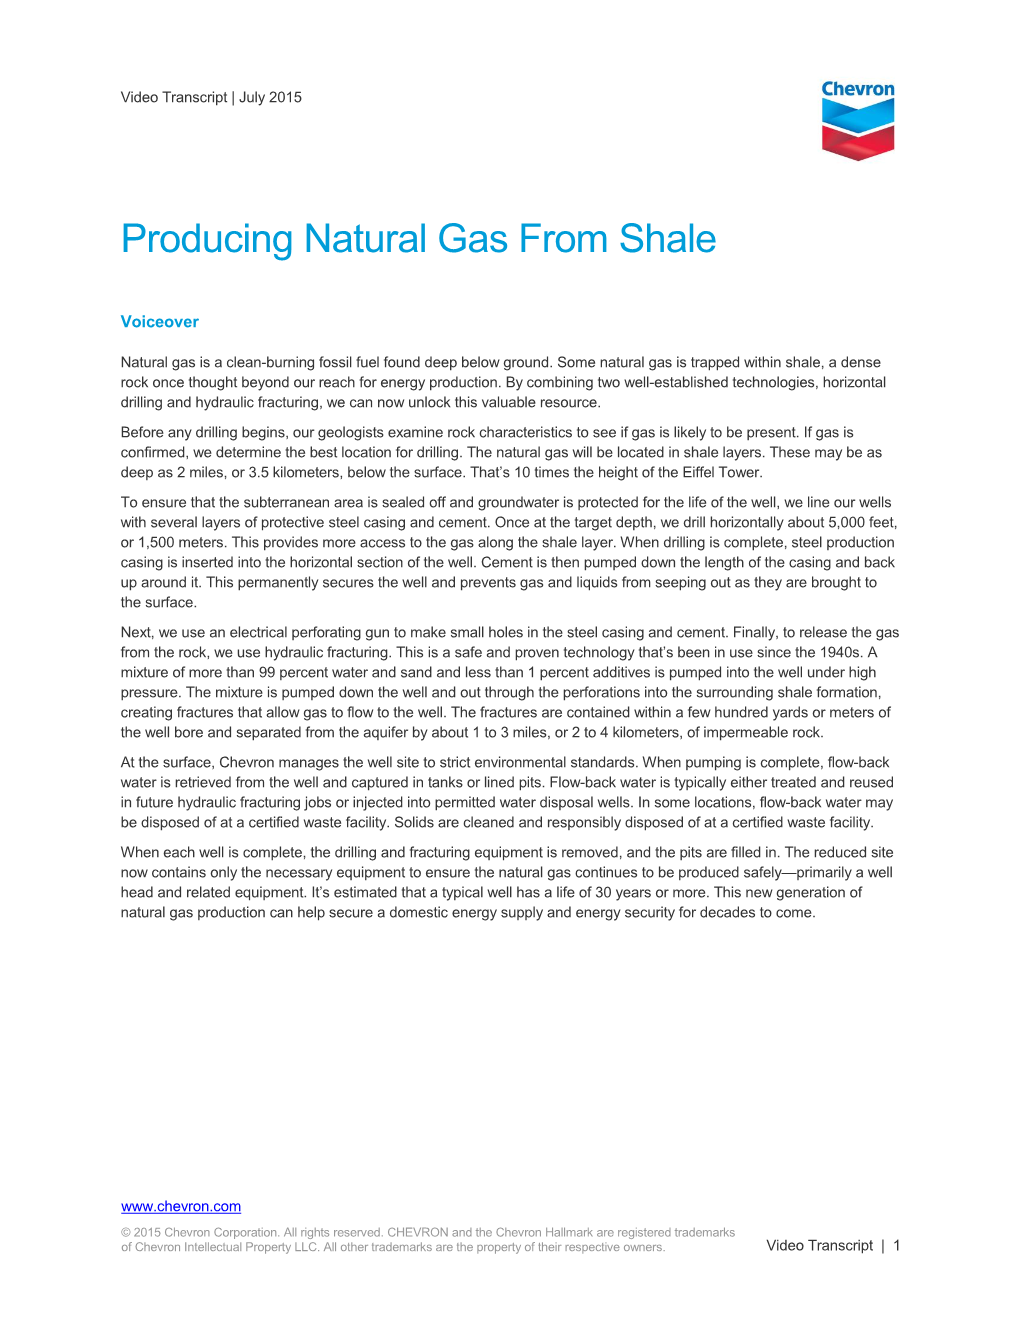 Producing Natural Gas from Shale